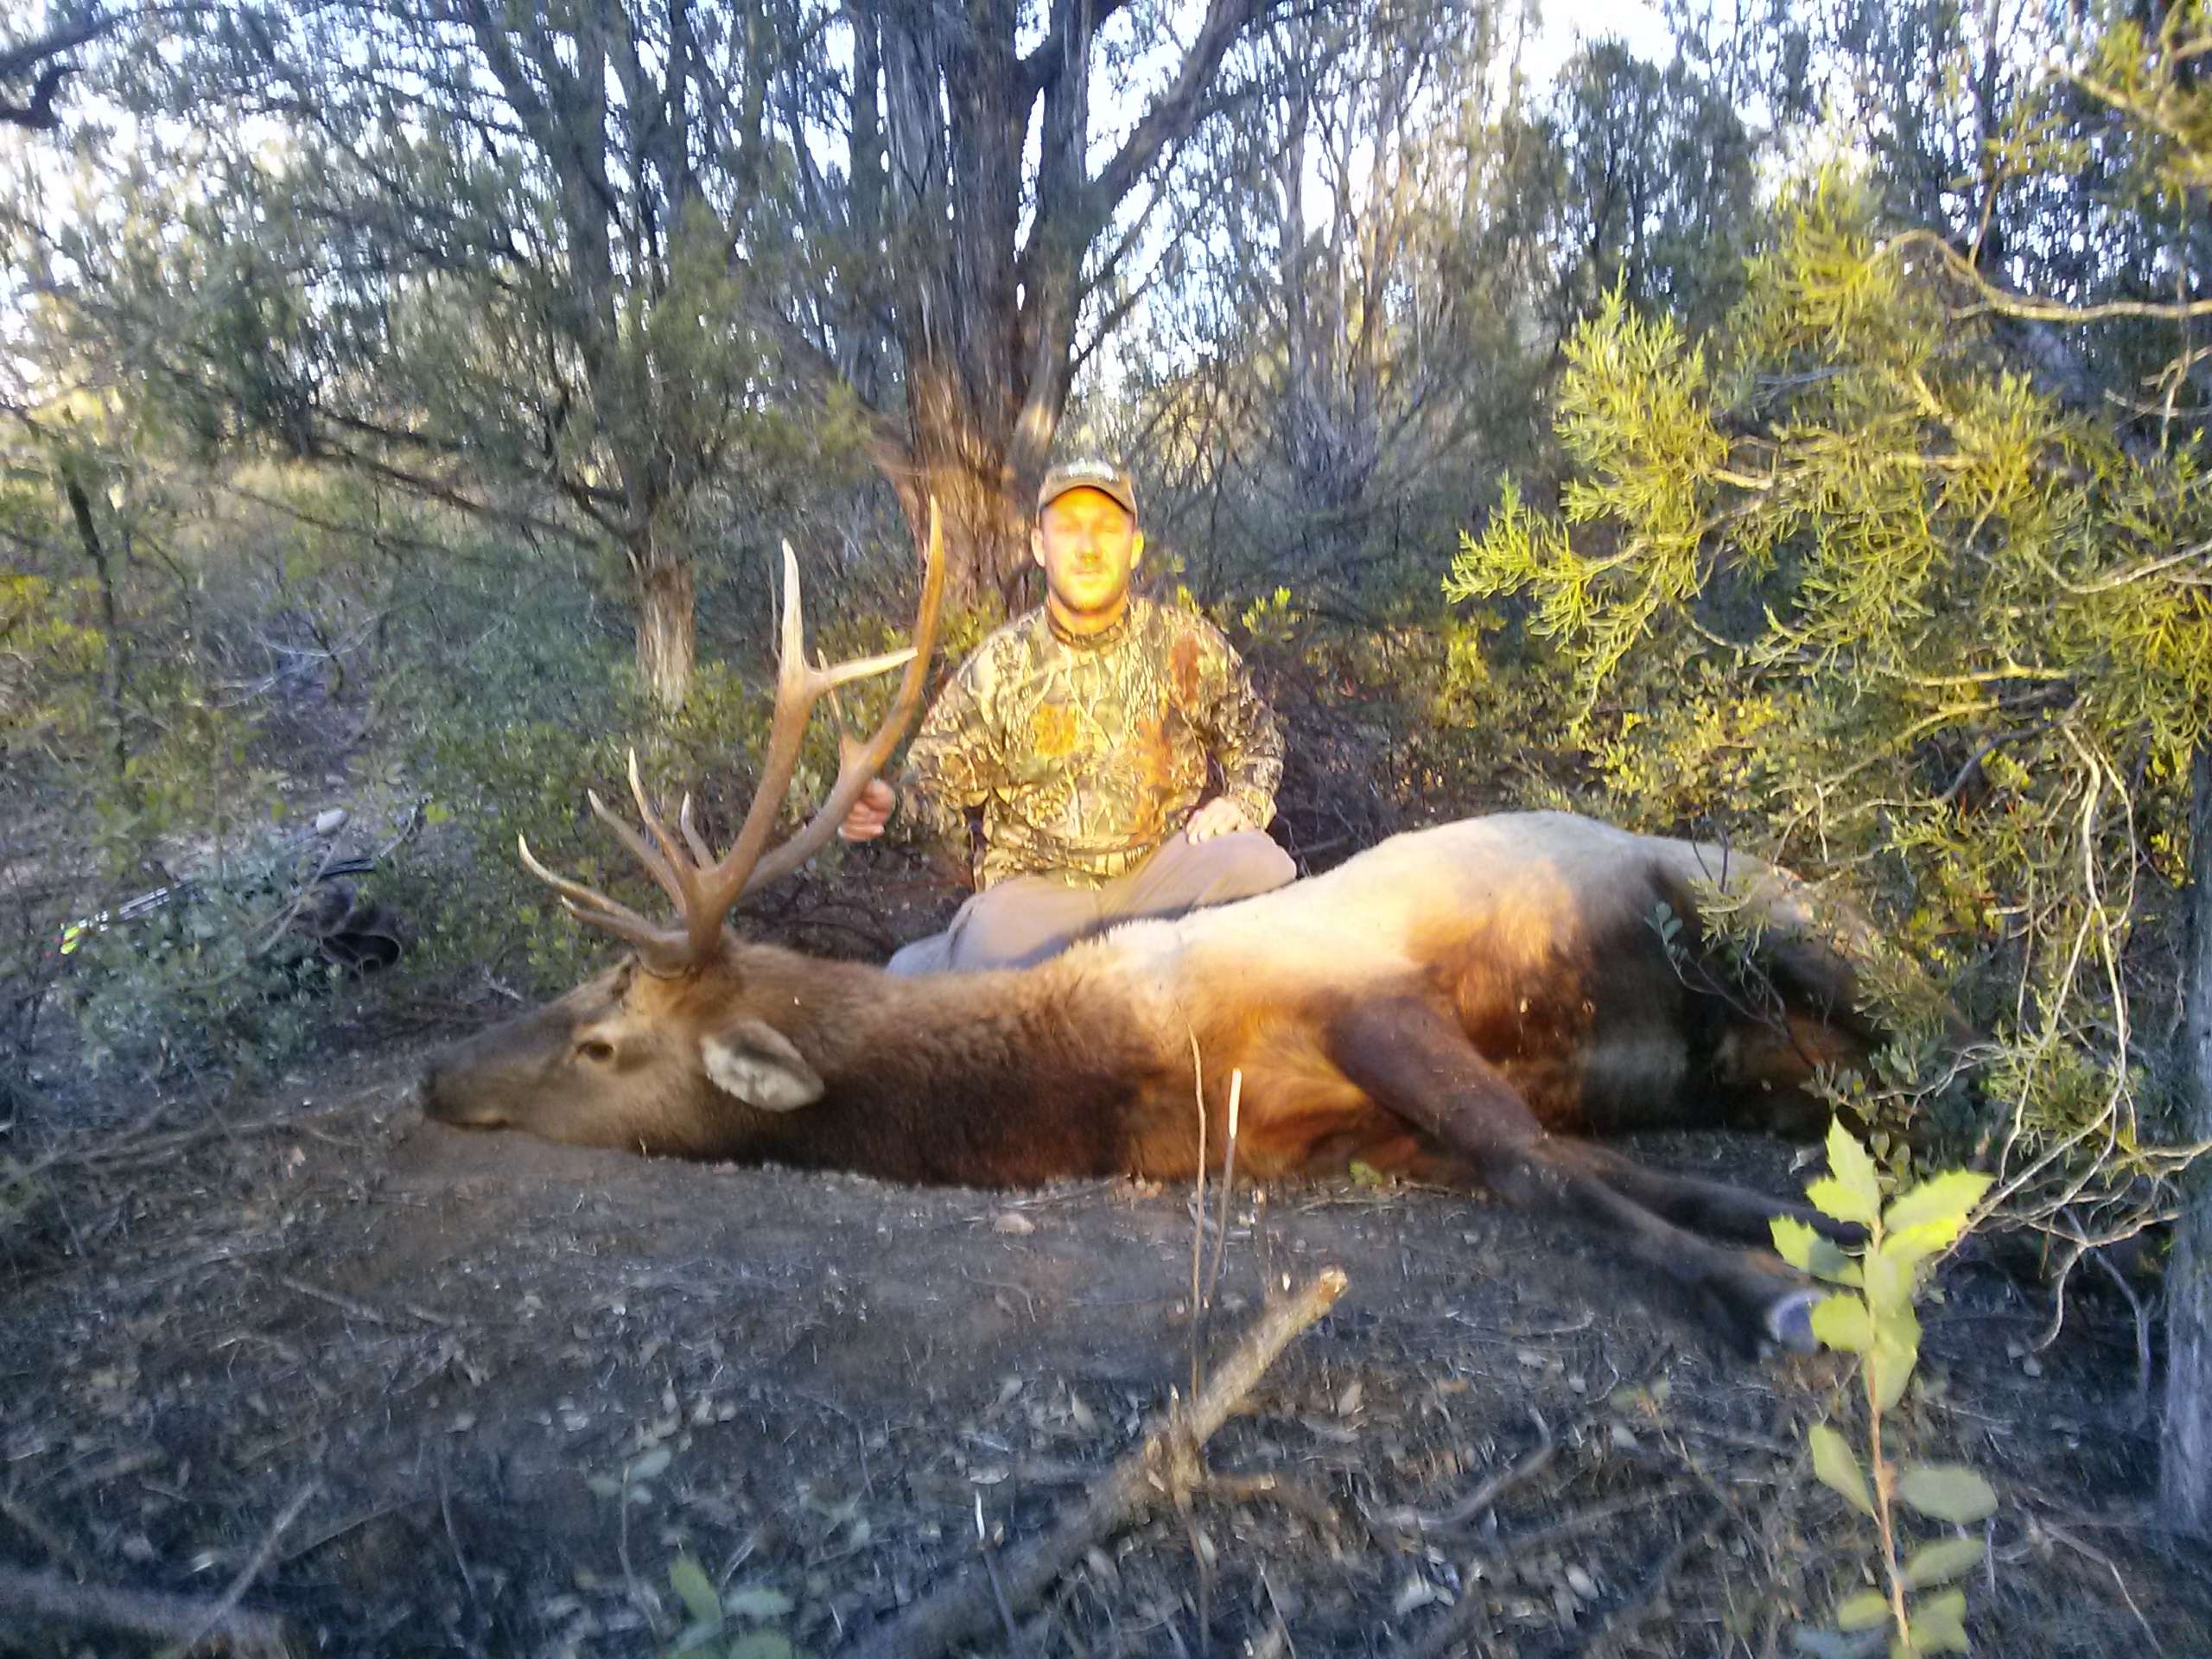 Another shot of Chapman with his bull elk.